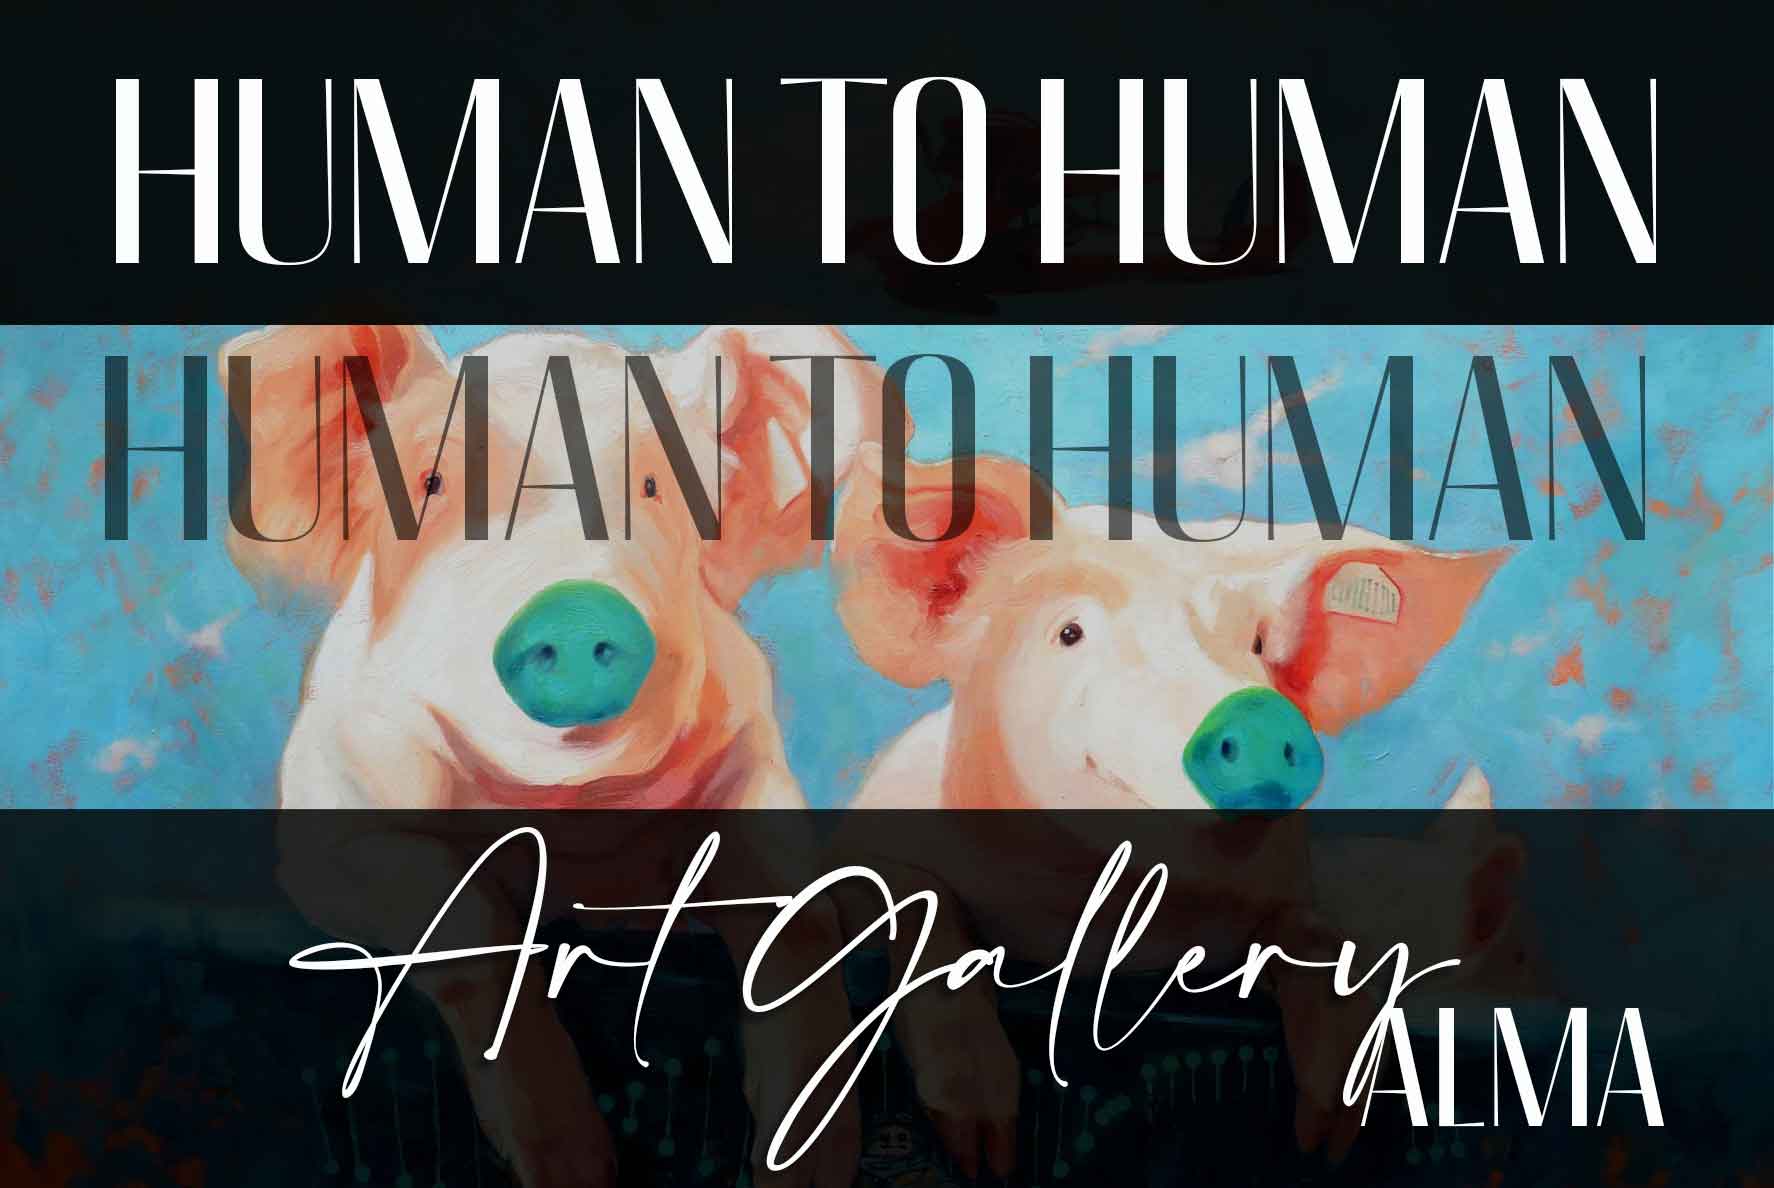 In this image we see some paintings for sale by the great artist Aldo Acosta Scholz, his series of artwork human to human. The purpose of the image is to invite you to view the original paintings for sale and limited edition art prints in our art gallery